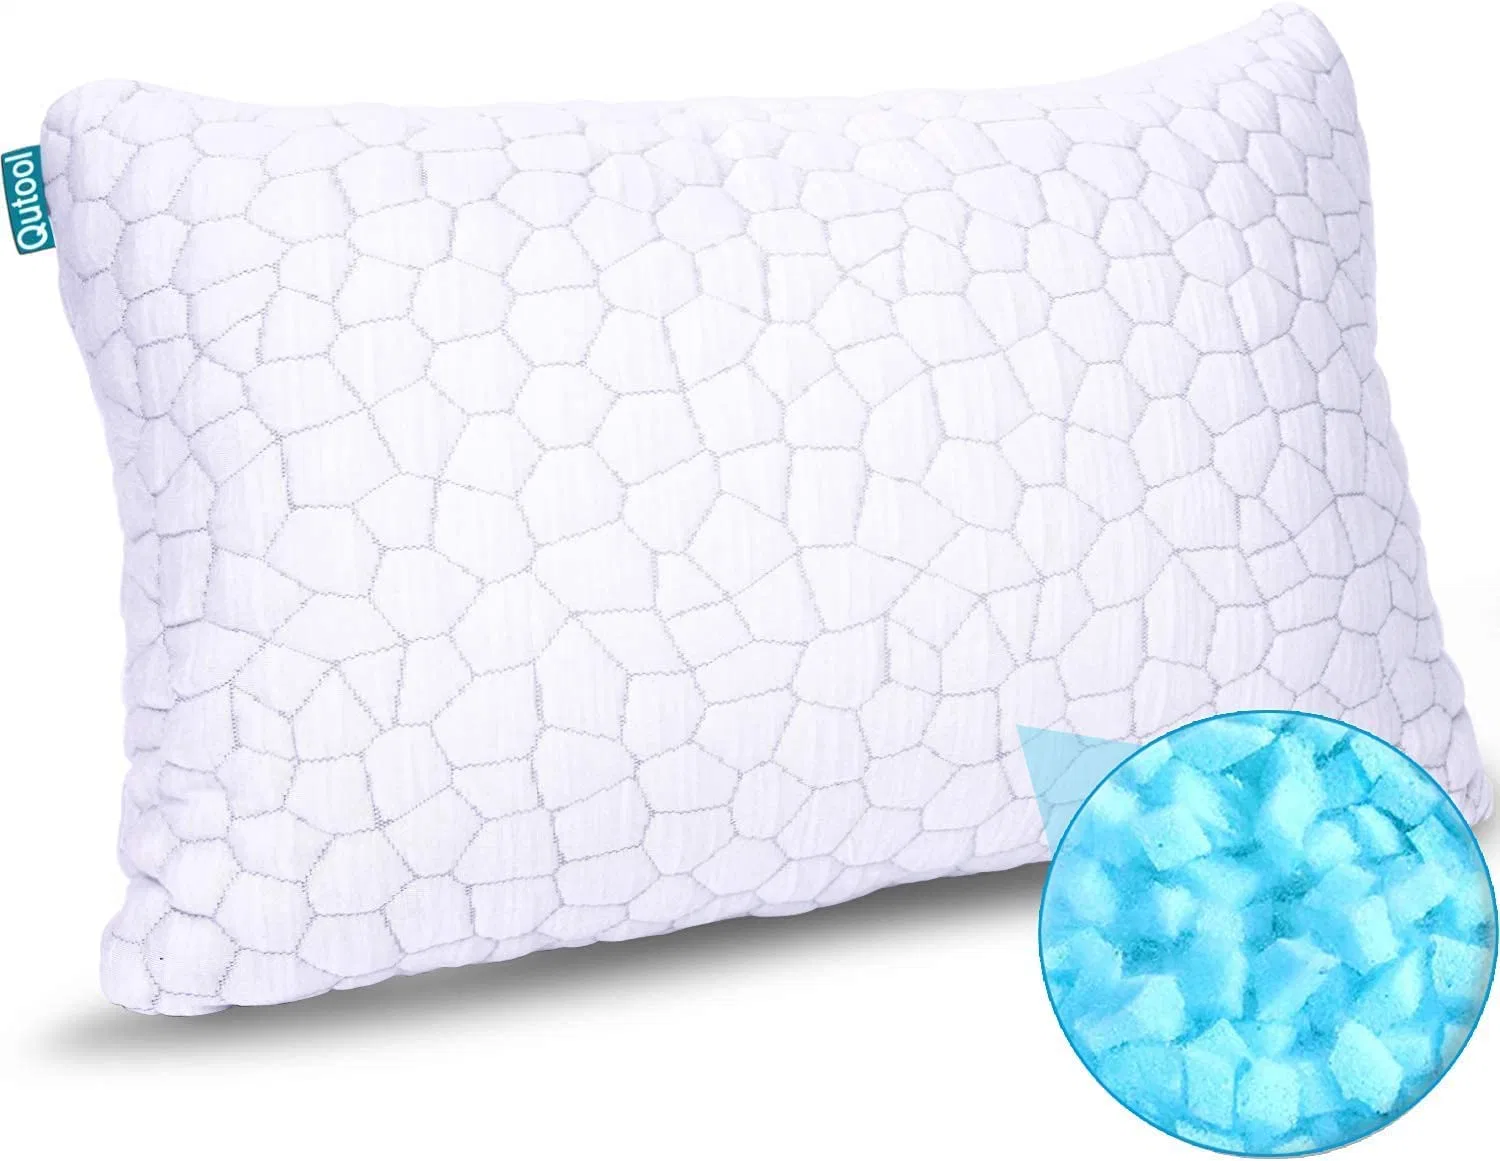 Cooling Bed Pillows for Sleeping Shredded Memory Foam Pillows - Gel Pillow Firm Yet Support Adjustable Bamboo Pillows